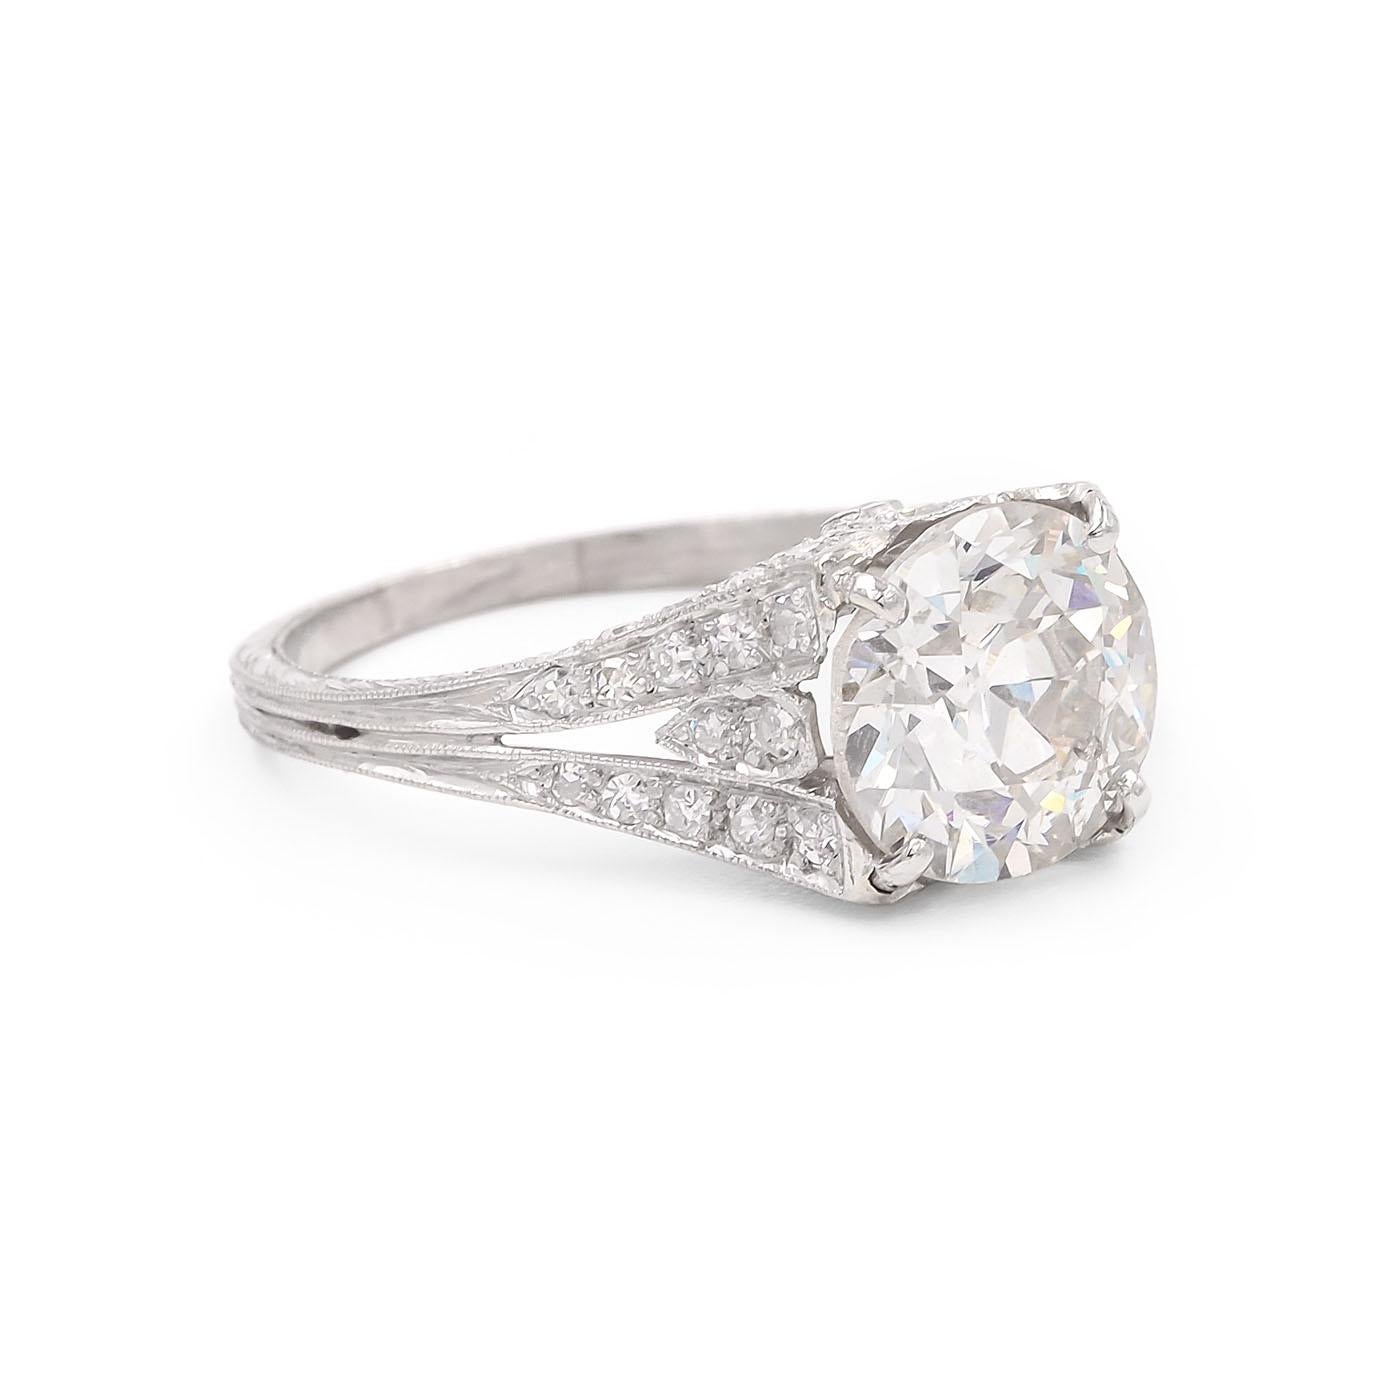 French Belle Epoque (Edwardian Era) 2.99 Carat Old European Cut Diamond Engagement Ring composed of platinum. The 2.99 carat Old European Cut diamond is GIA certified L color & SI2 clarity. With an additional 52 Old Single Cut diamonds weighing